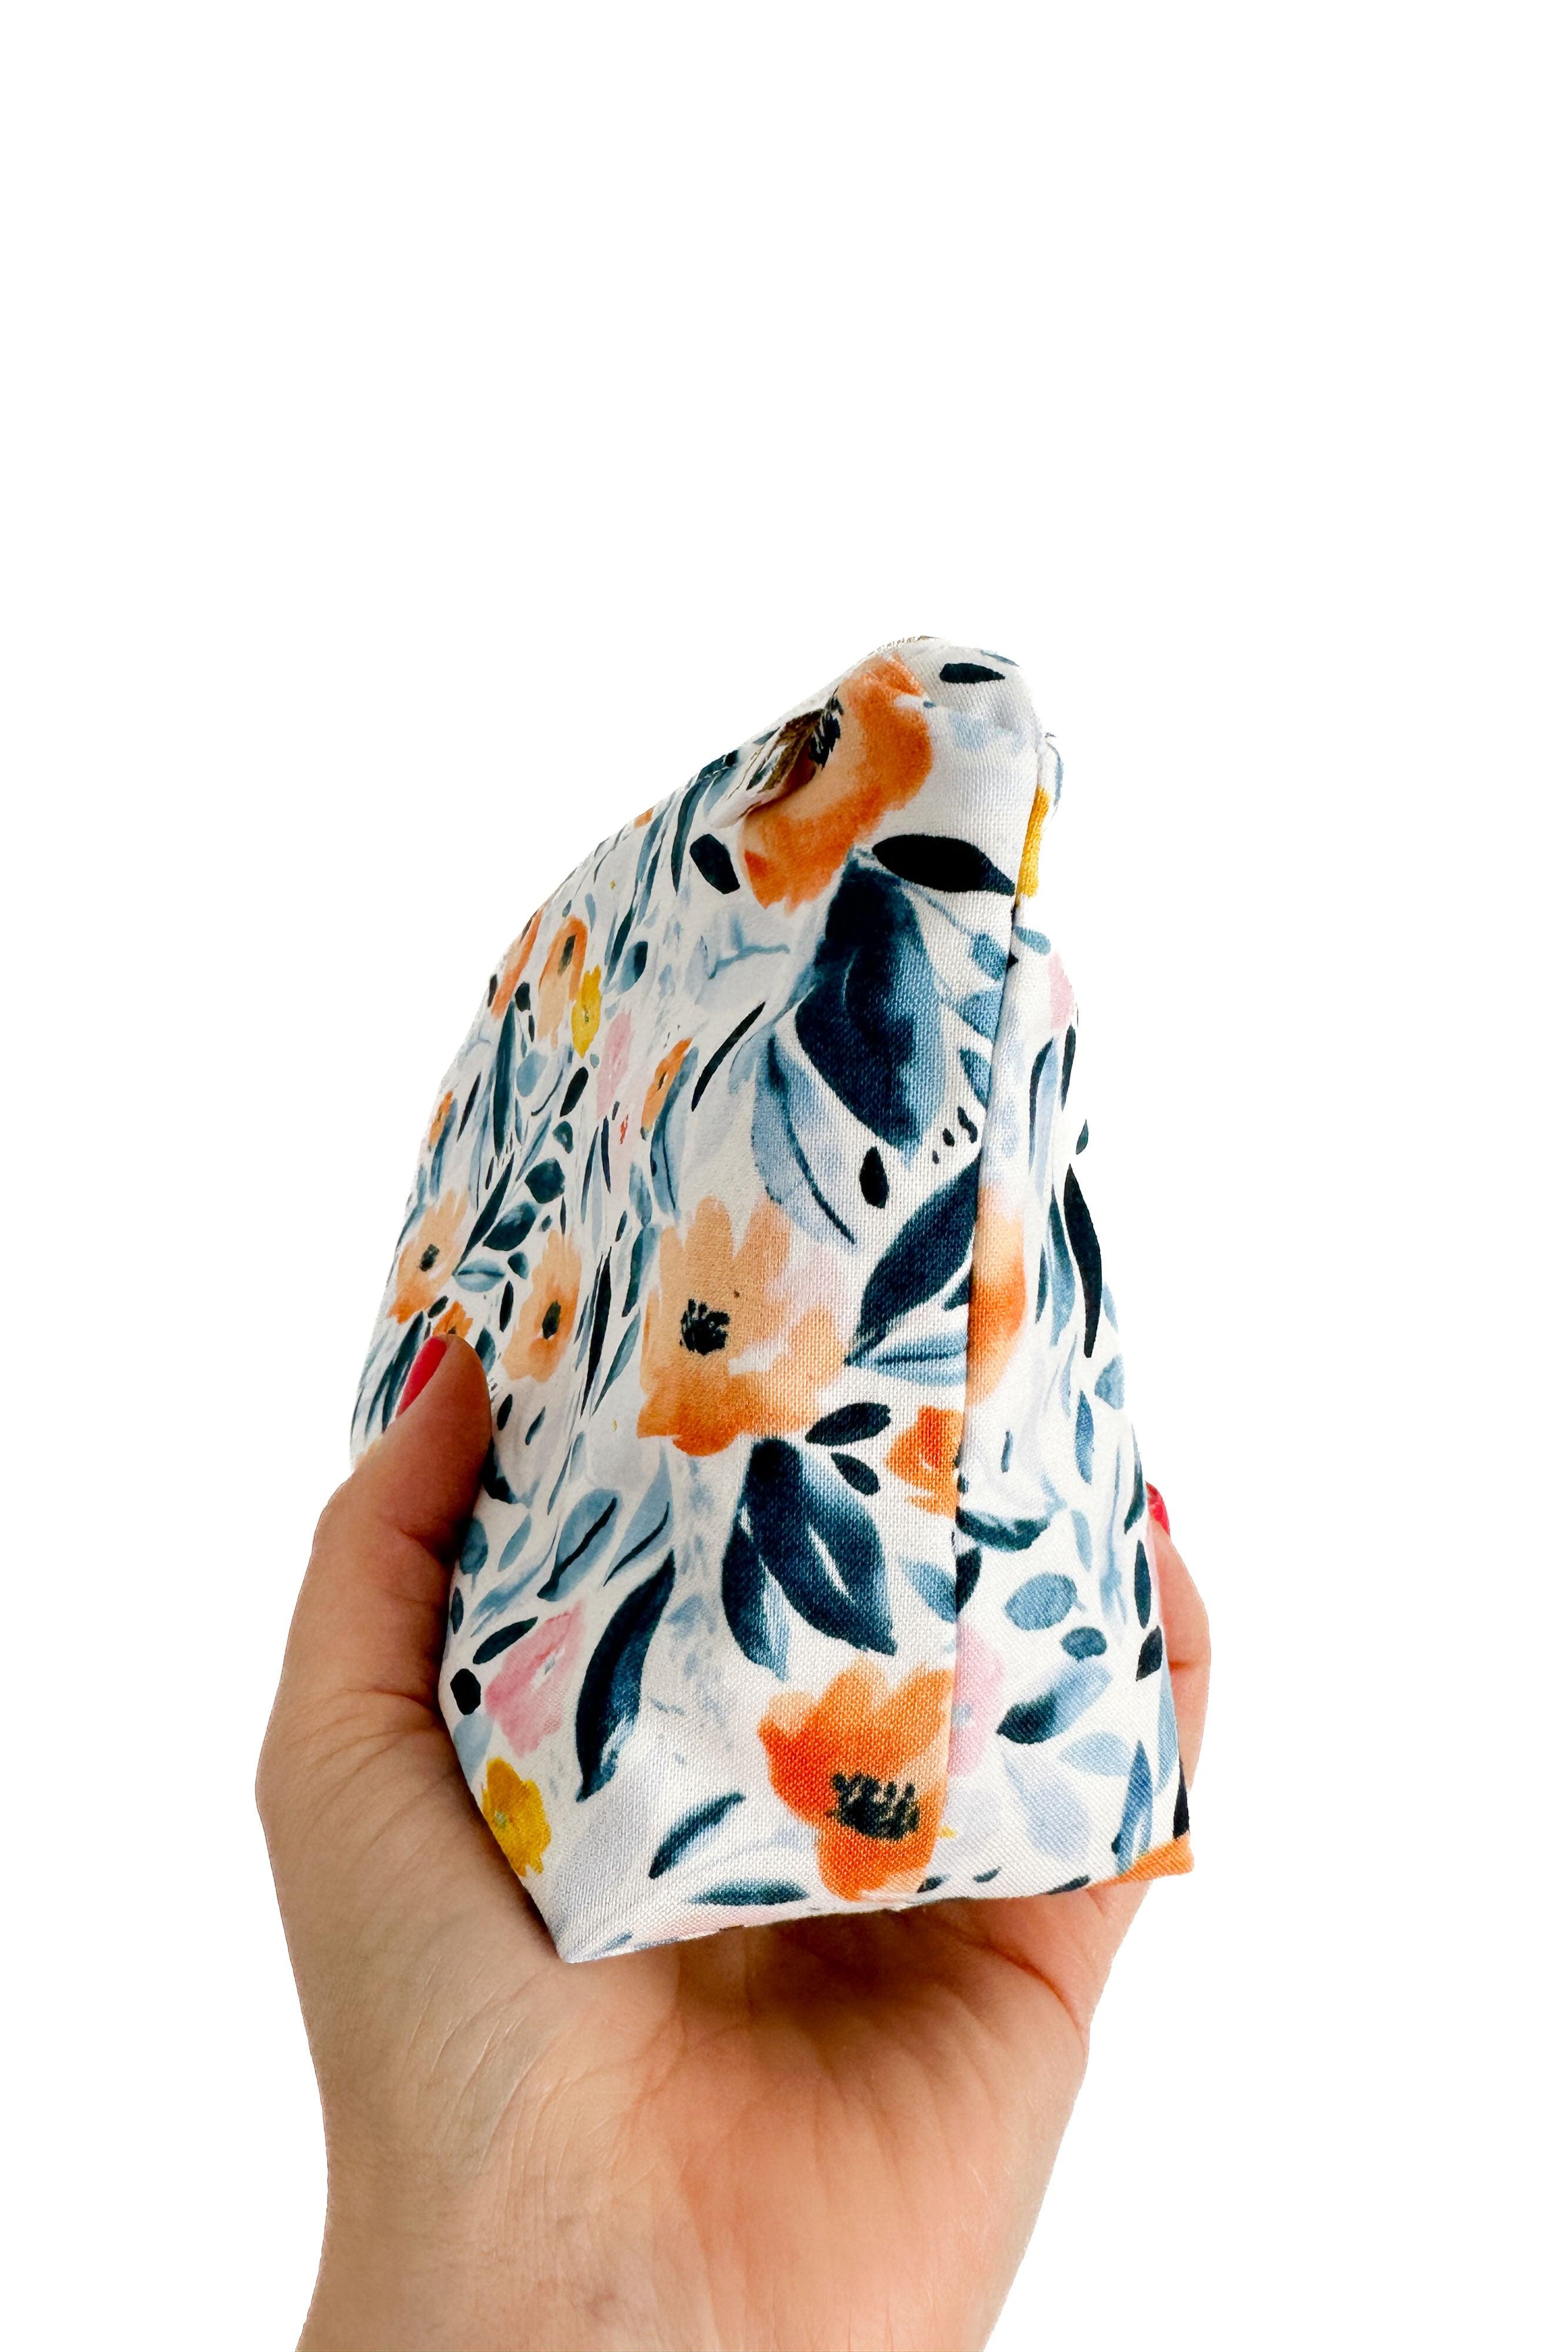 Watercolor Floral Mini Maxx Travel Bag READY TO SHIP - Modern Makerie